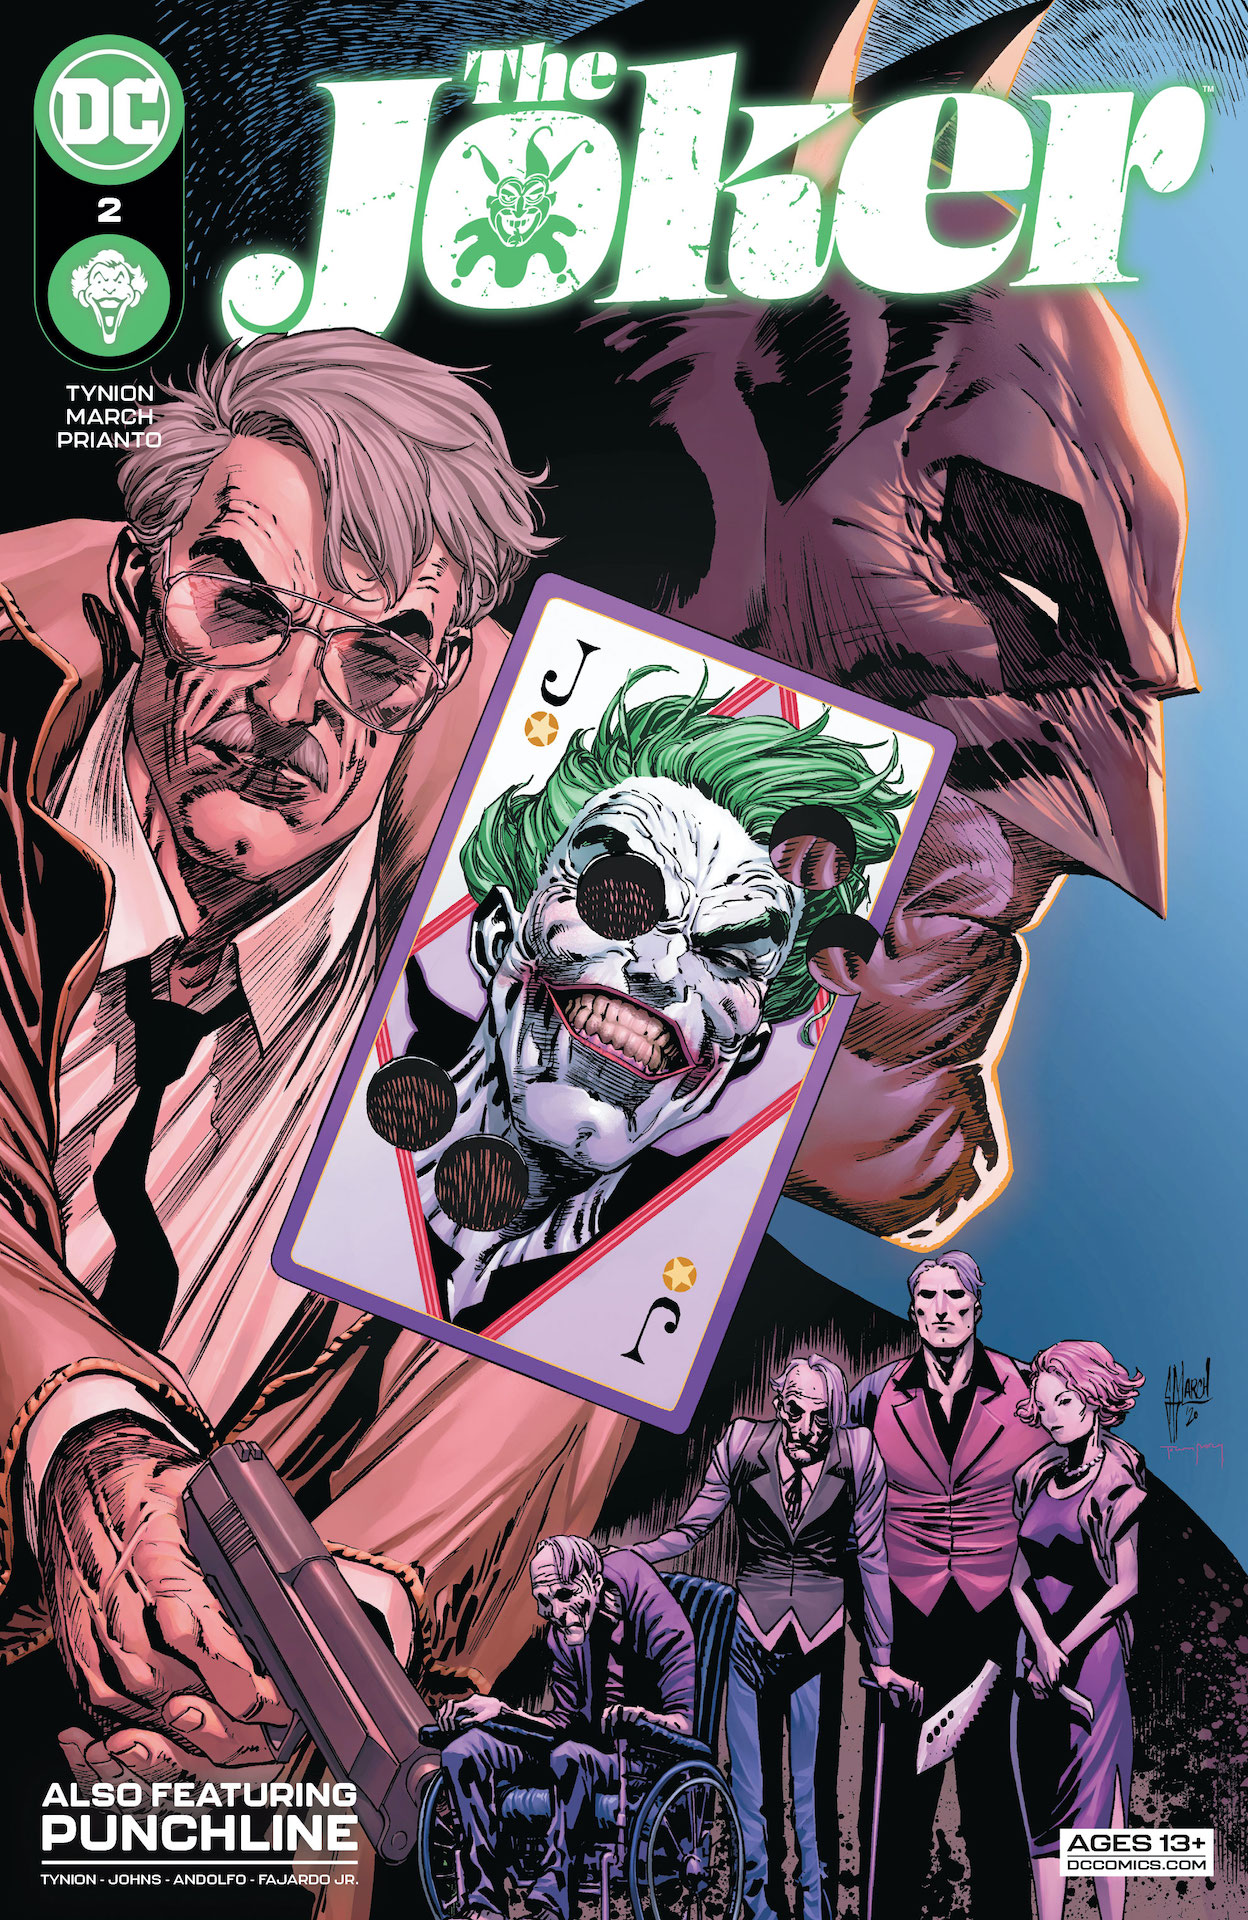 DC Preview: The Joker #2